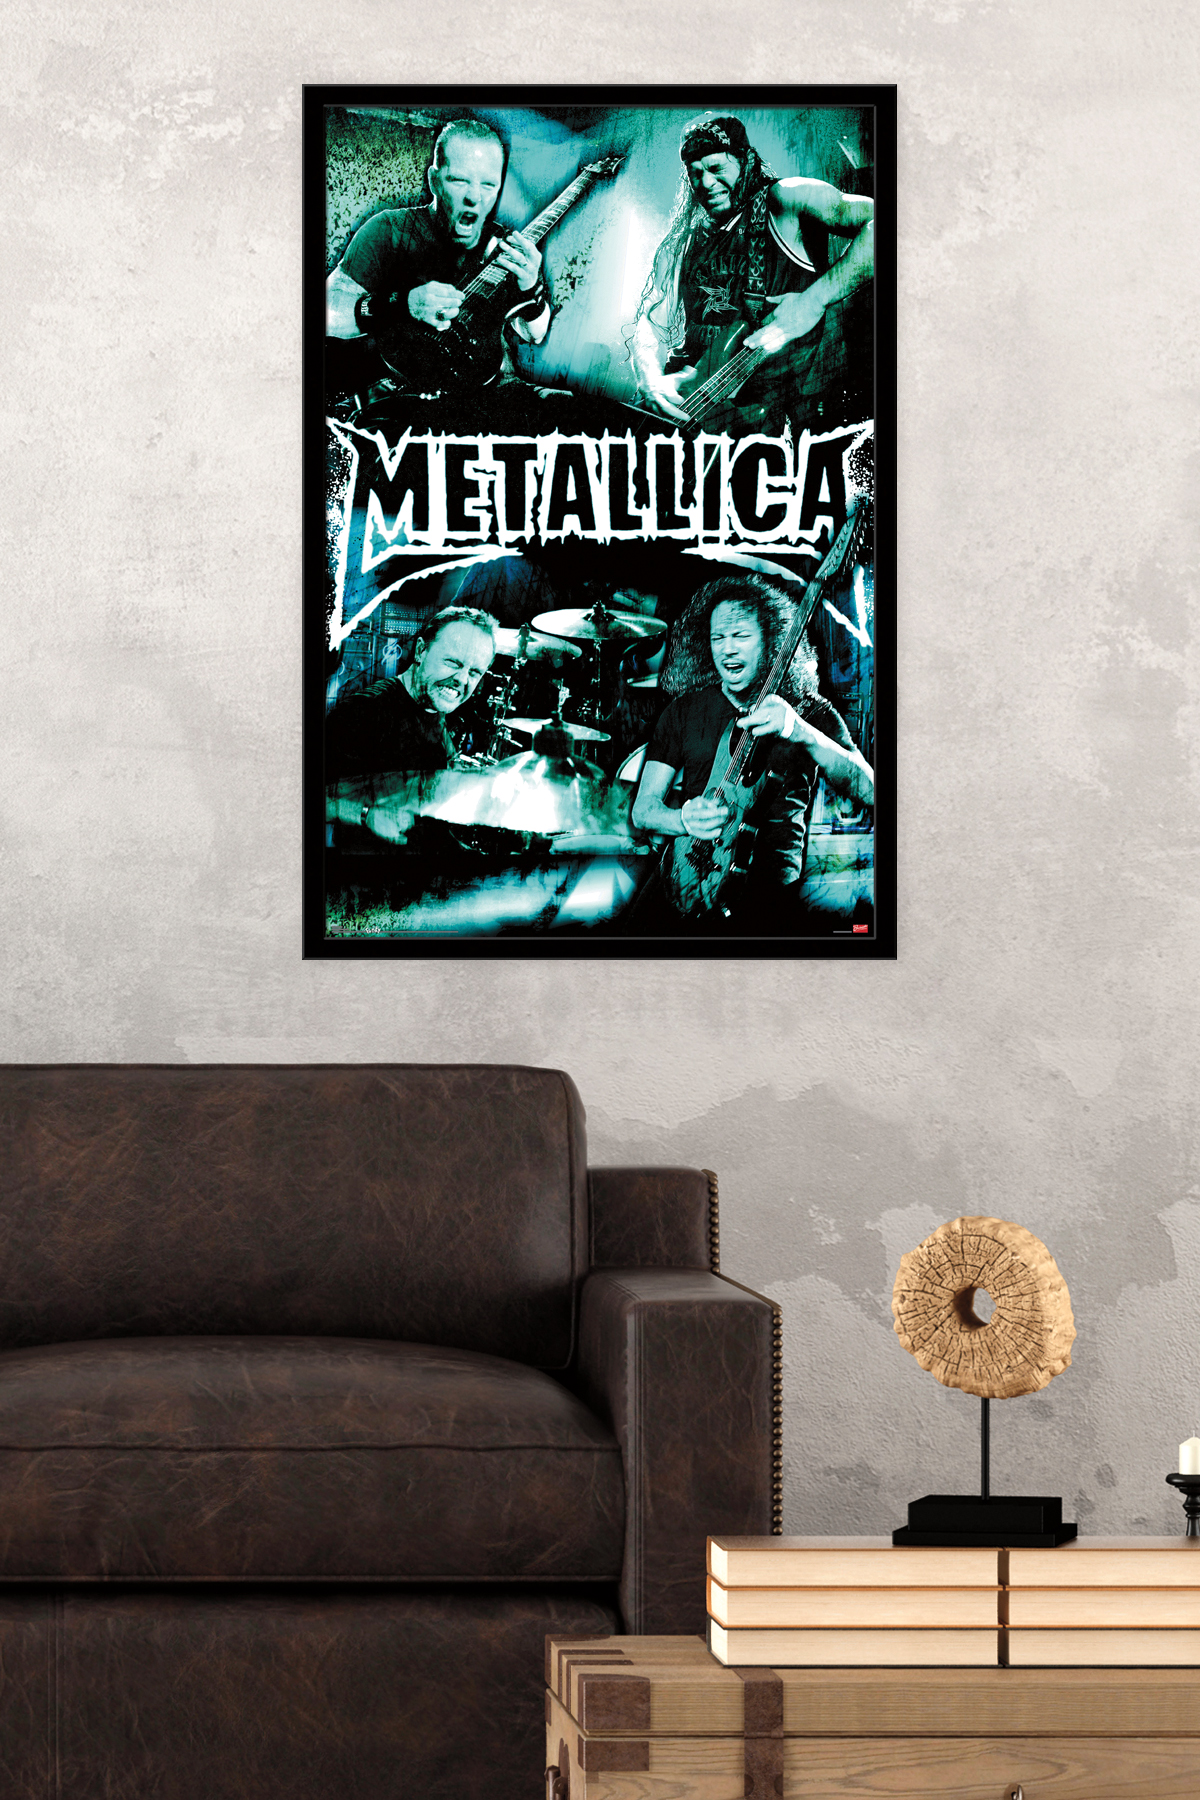 Trends International Metallica Live Wall Poster 22.375" x 34" - image 1 of 1